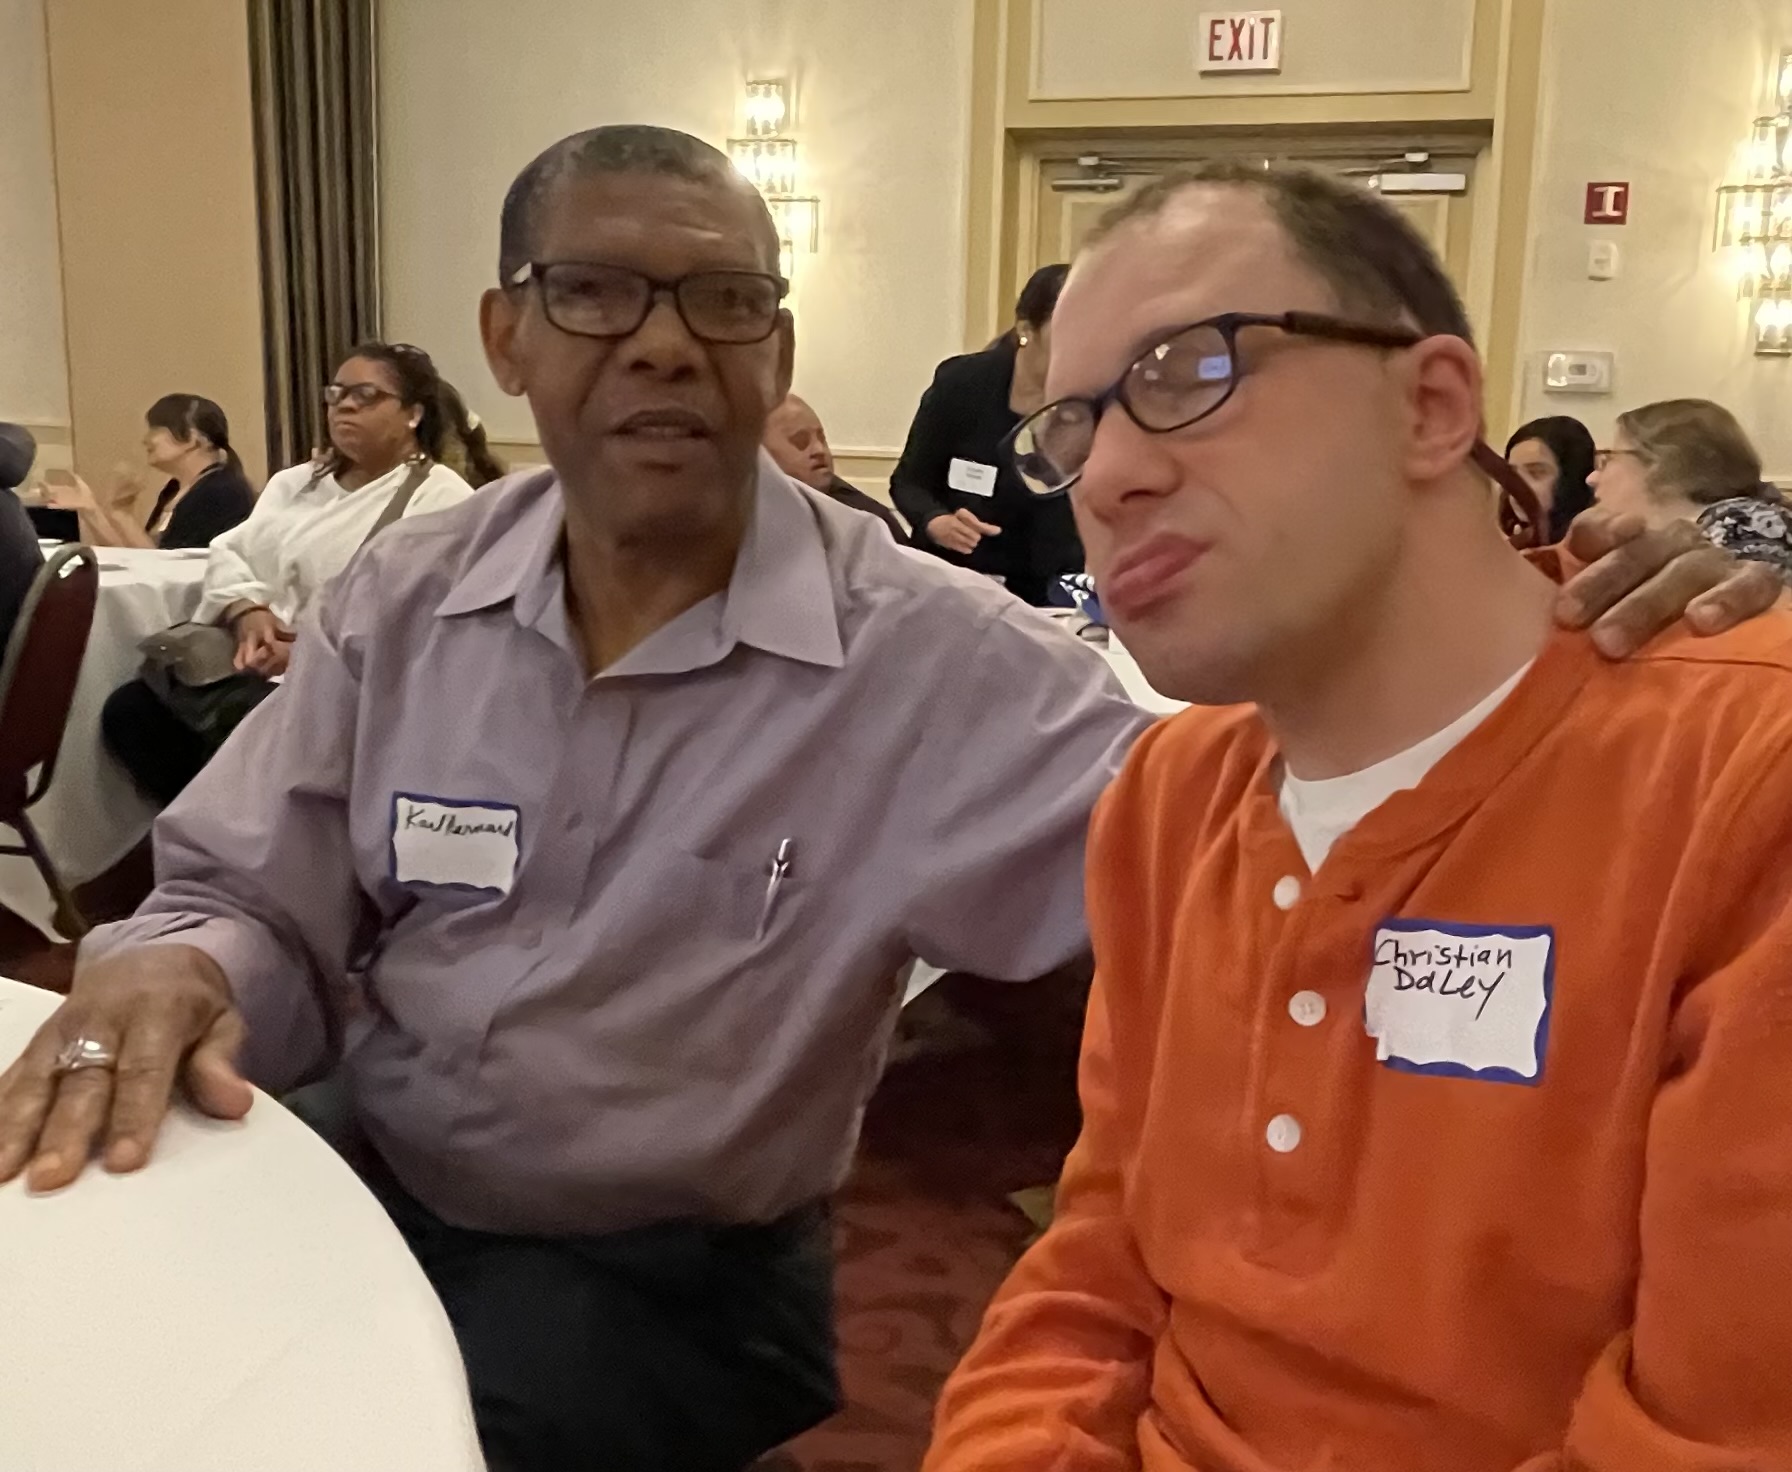 Christian with a Guild staff member at a self-advocacy conference